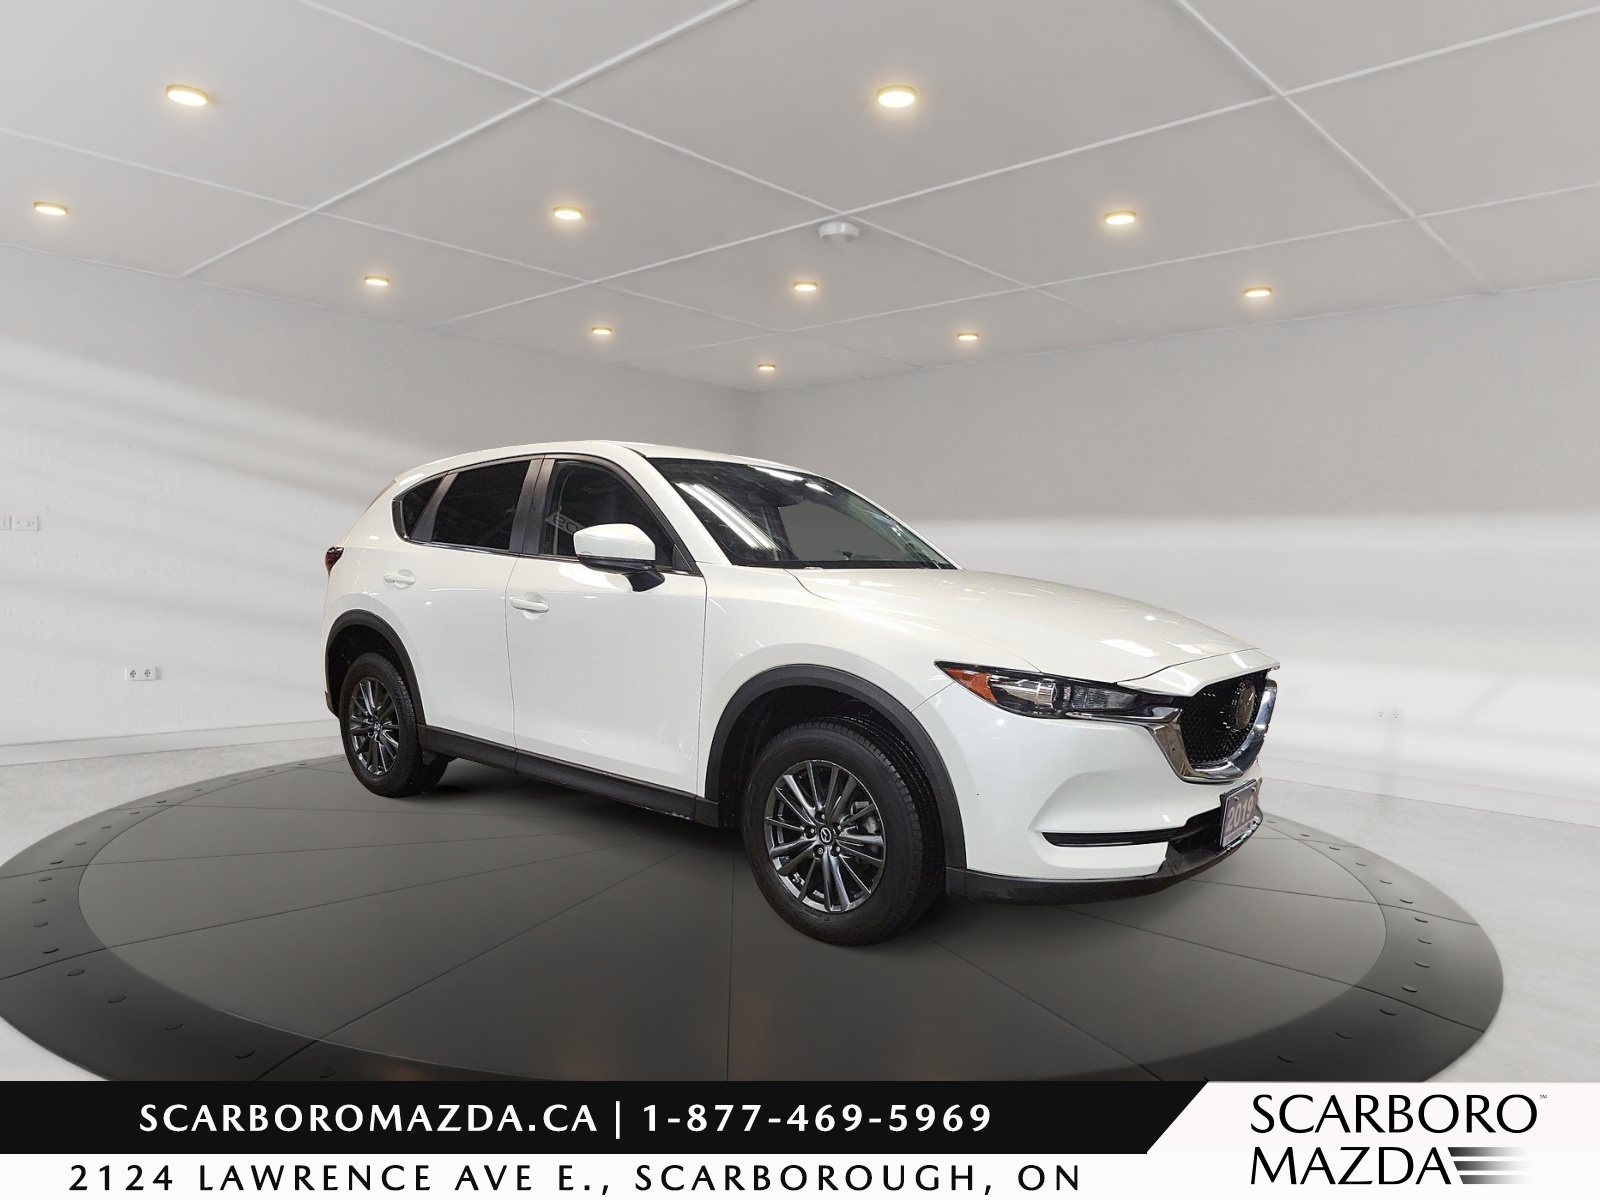 2019 Mazda CX-5 GS|AWD|NEW BRAKE|1 OWNER CLEAN CARFAX|LOW KM